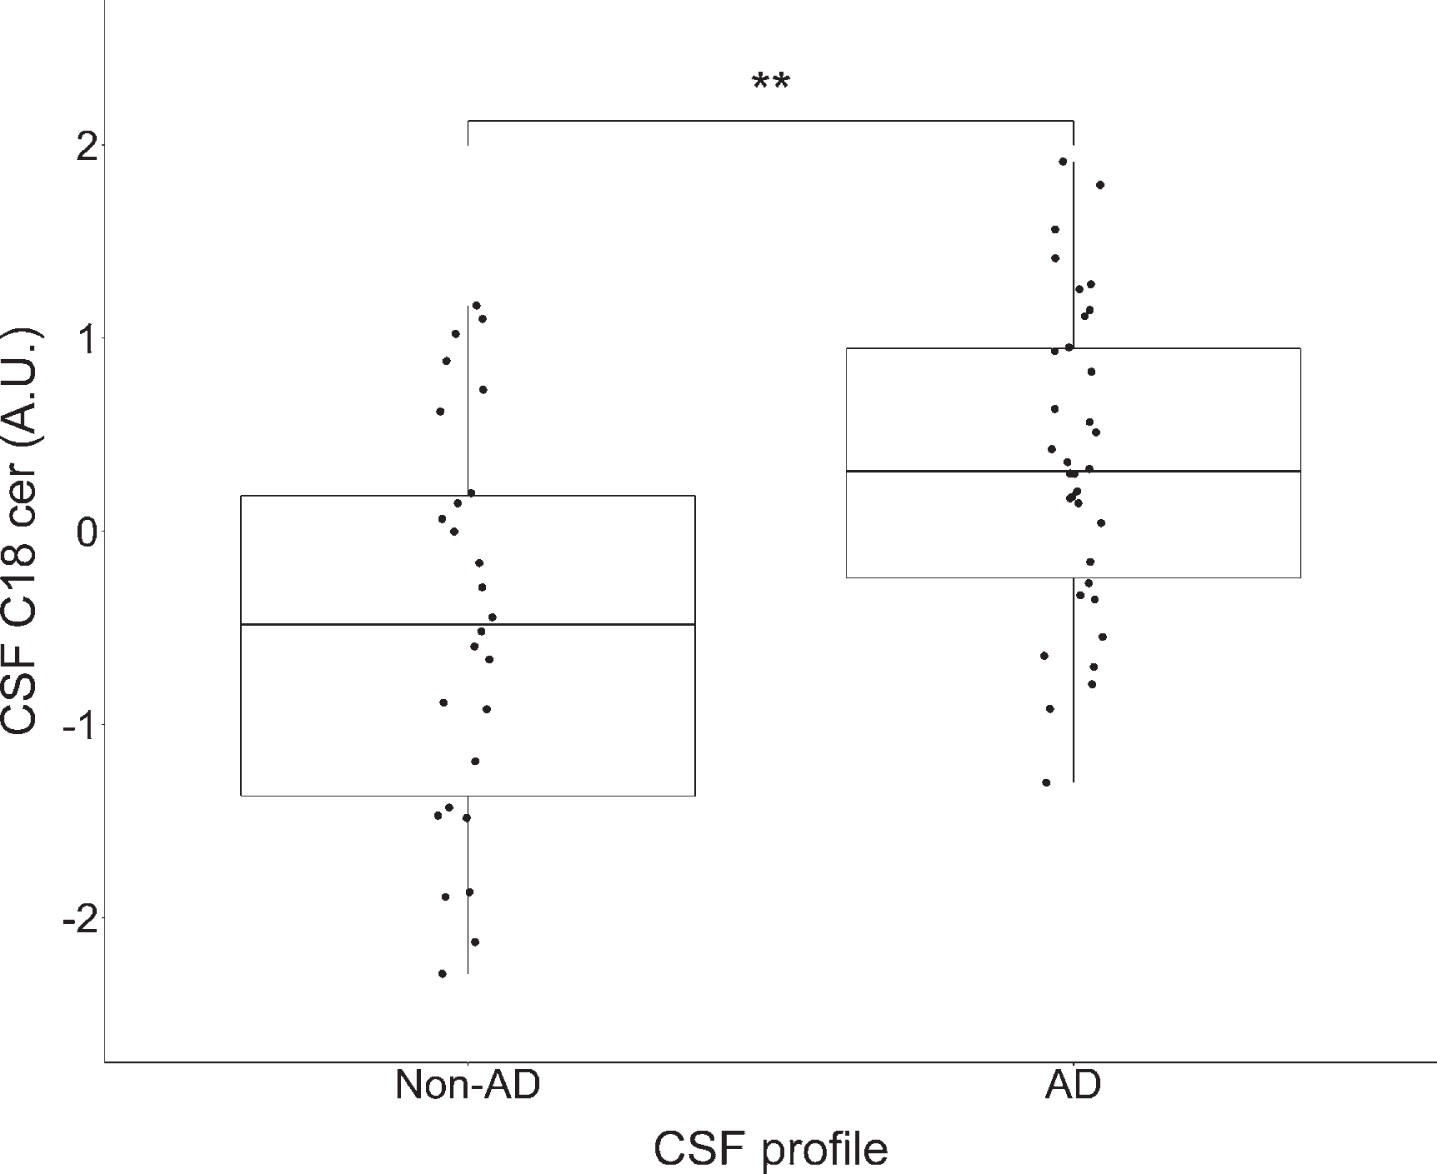 Comparison in levels of CSF C18 ceramide by CSF profile (non-AD and AD). *p < 0.05, **p < 0.01, ***p < 0.001 significance according to Mann-Whitney U non-parametric test. Based on normalized peak area arbitrary units (A.U.), log2-transformed and autoscaled before analysis. The lower and upper horizontal lines of the boxplot correspond to the 25th and the 75th centiles and the middle line to the median. Levels of CSF C18 ceramide were significantly higher (p = 0.002) among participants with a CSF AD profile compared to those without.